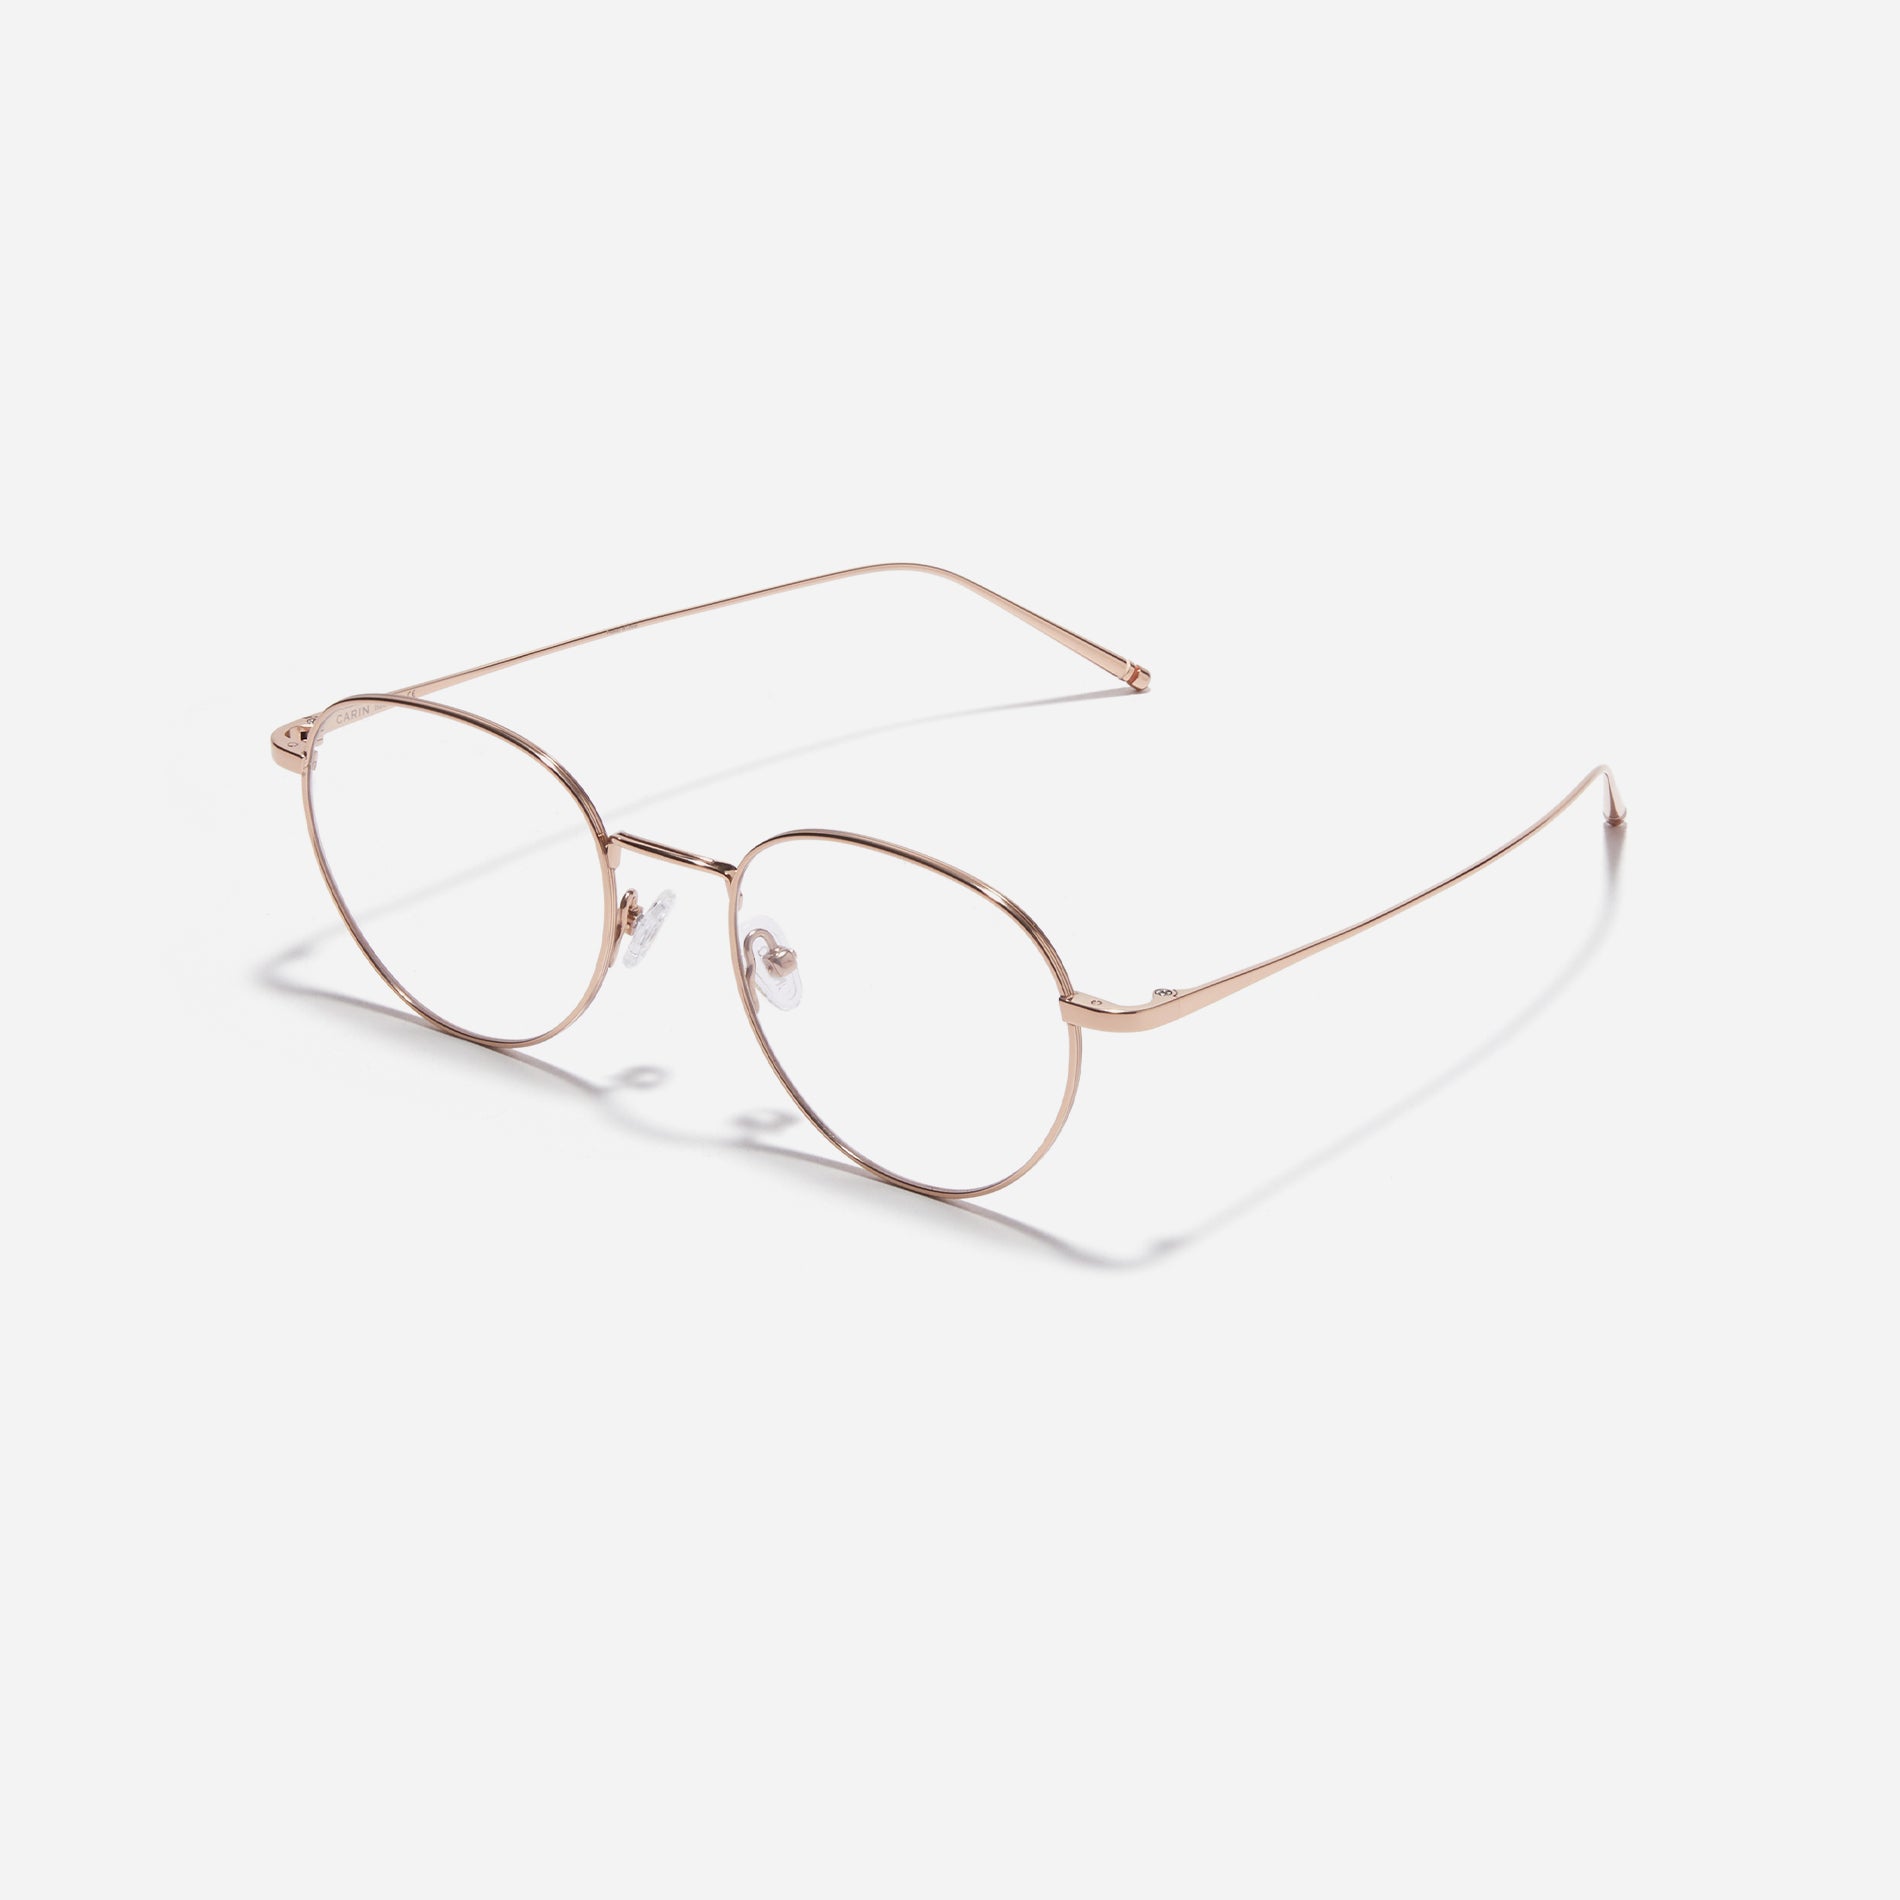 Polygon-shaped eyeglasses designed to effortlessly complement all face shapes. Crafted entirely from titanium, they ensure a remarkably light and durable wearing experience. Lika's casual design adds a fashionable touch to your daily look.